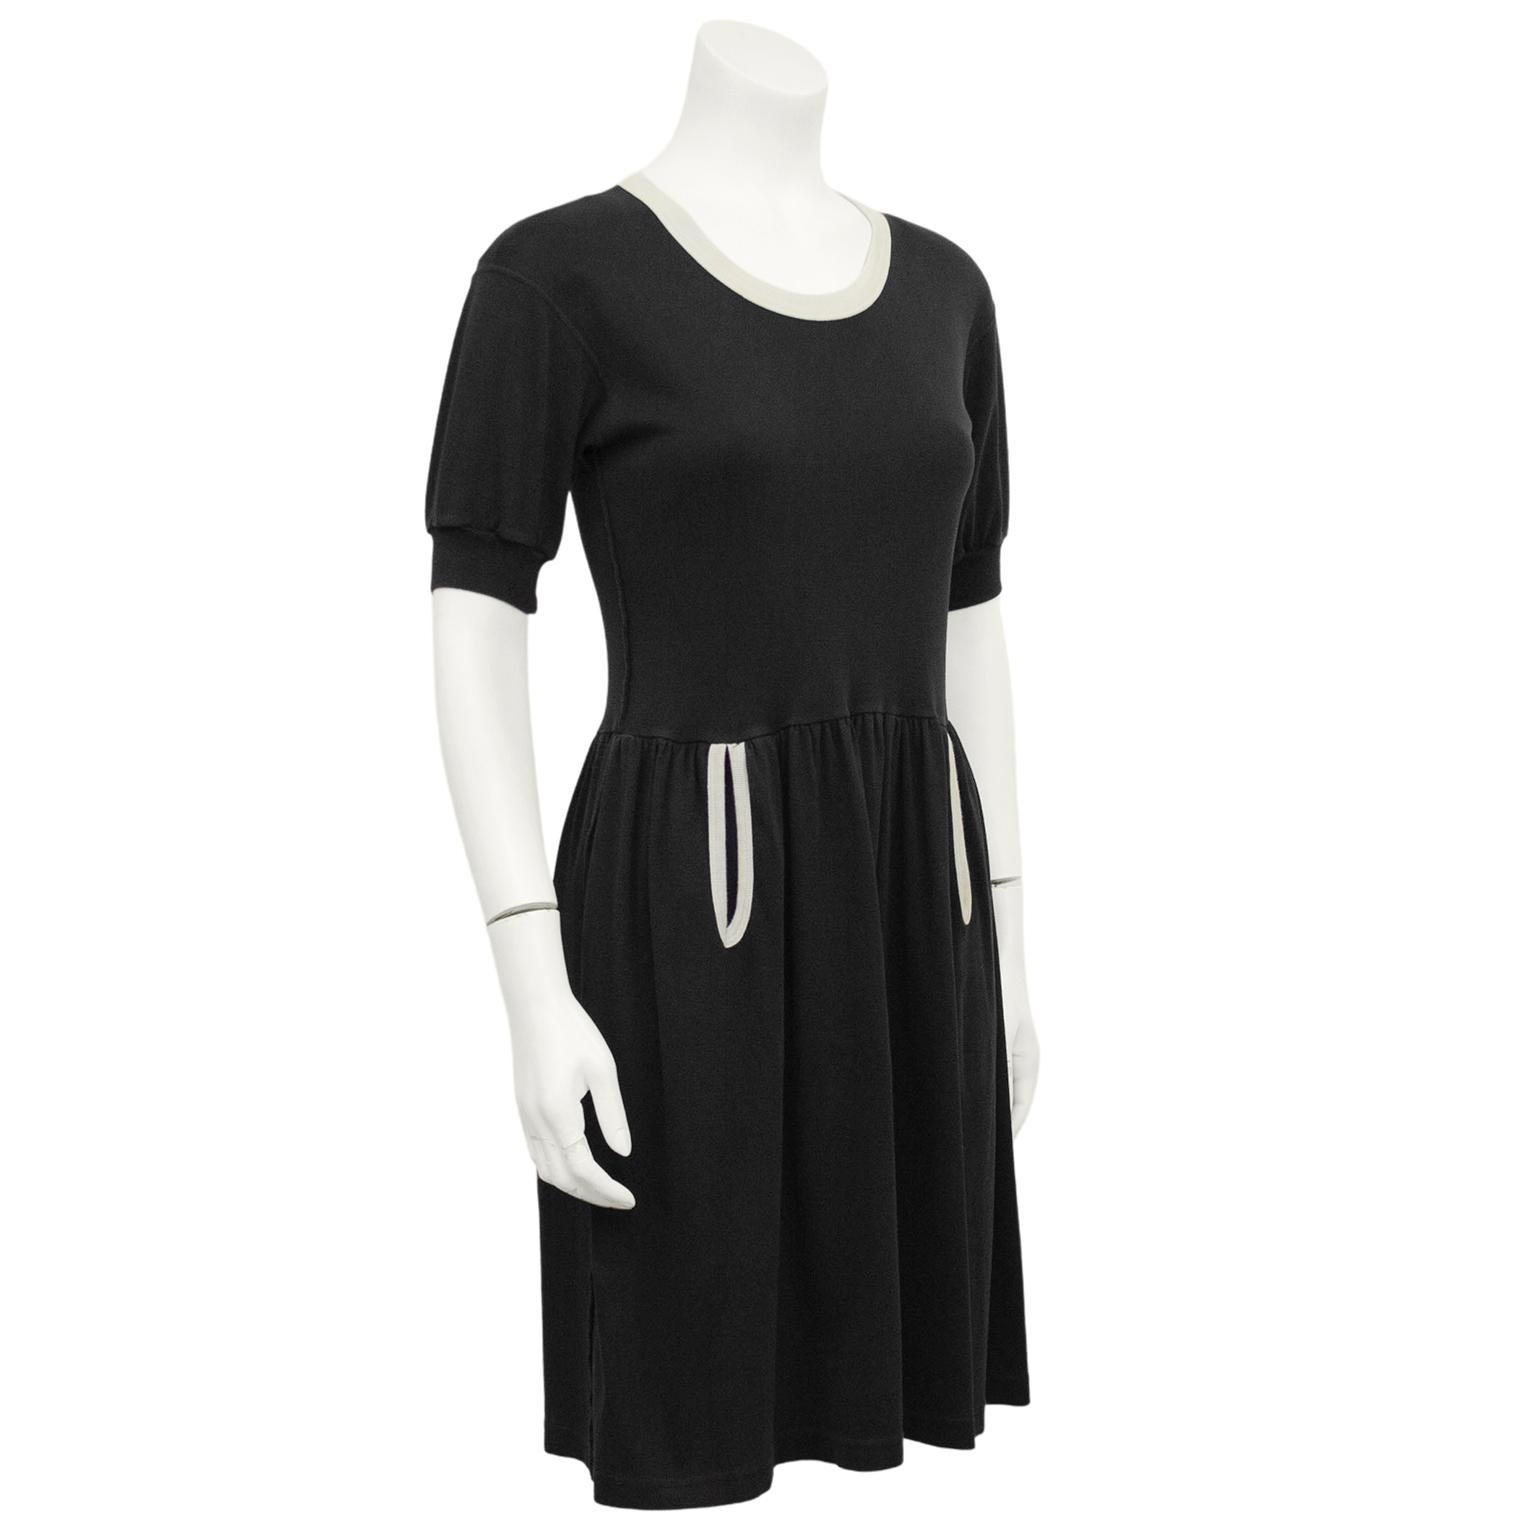 1980s Sonia Rykiel comfy cotton jersey knit day dress. Fit and flare shape, with a crew neckline and short bishop sleeves. Black with contrasting white ribbed trim at neckline and slit pockets. Pockets are a slight teardrop shape. Excellent vintage